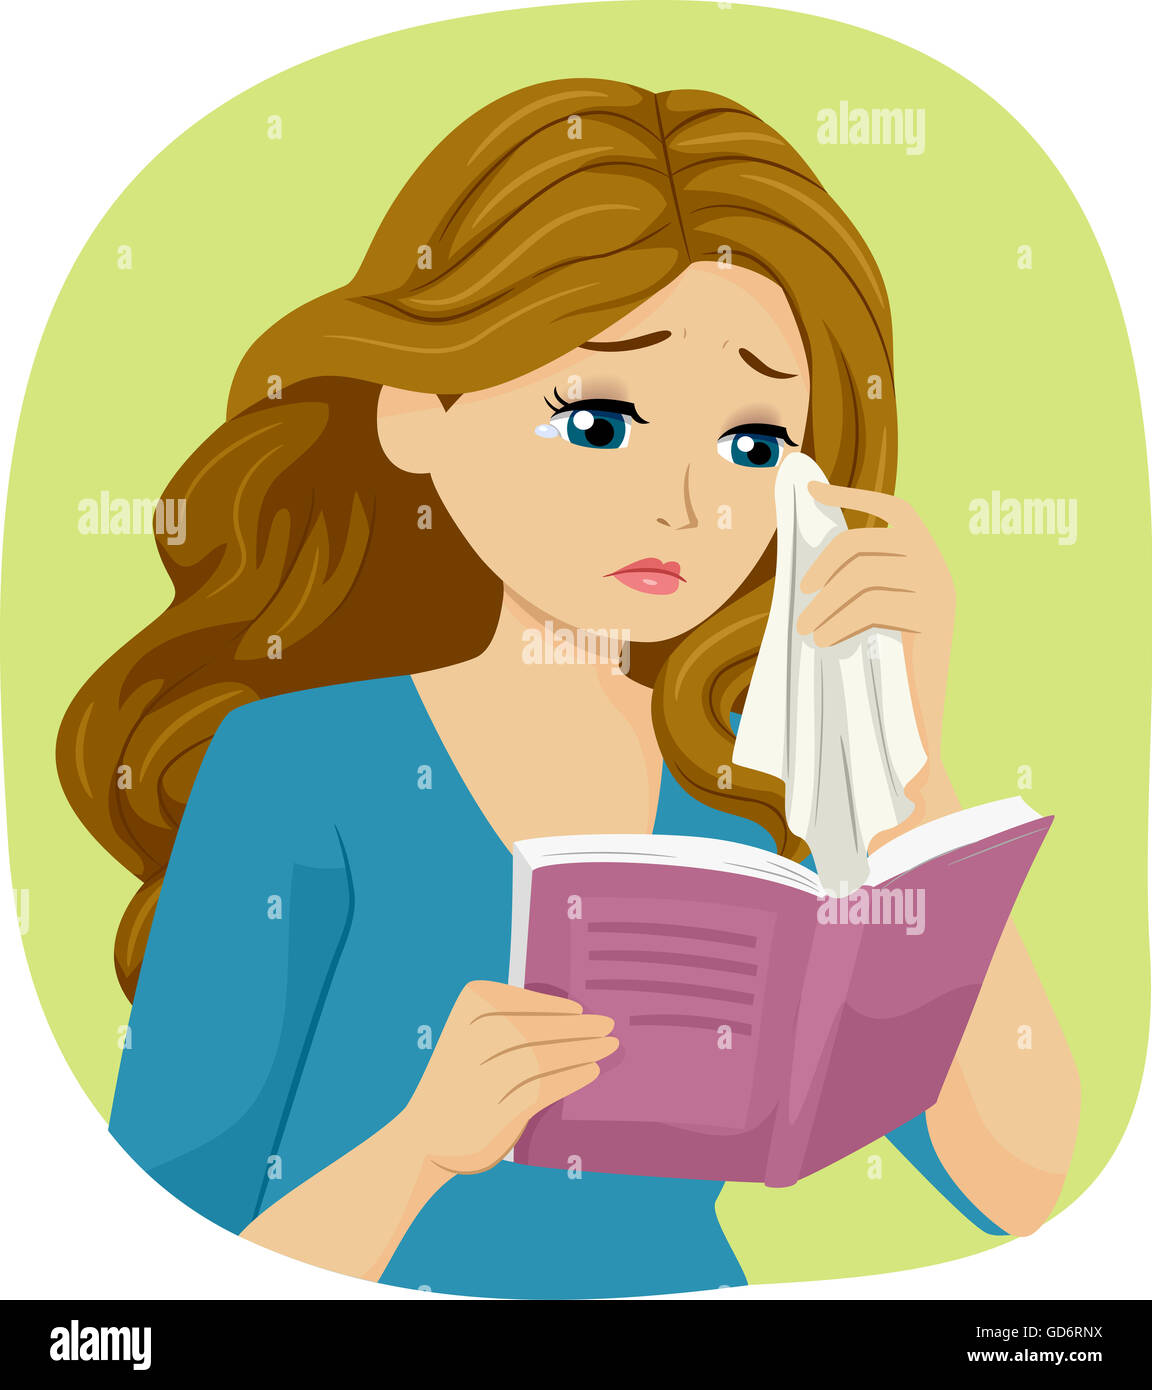 Illustration of a Teenage Girl Crying While Reading a Book Stock Photo